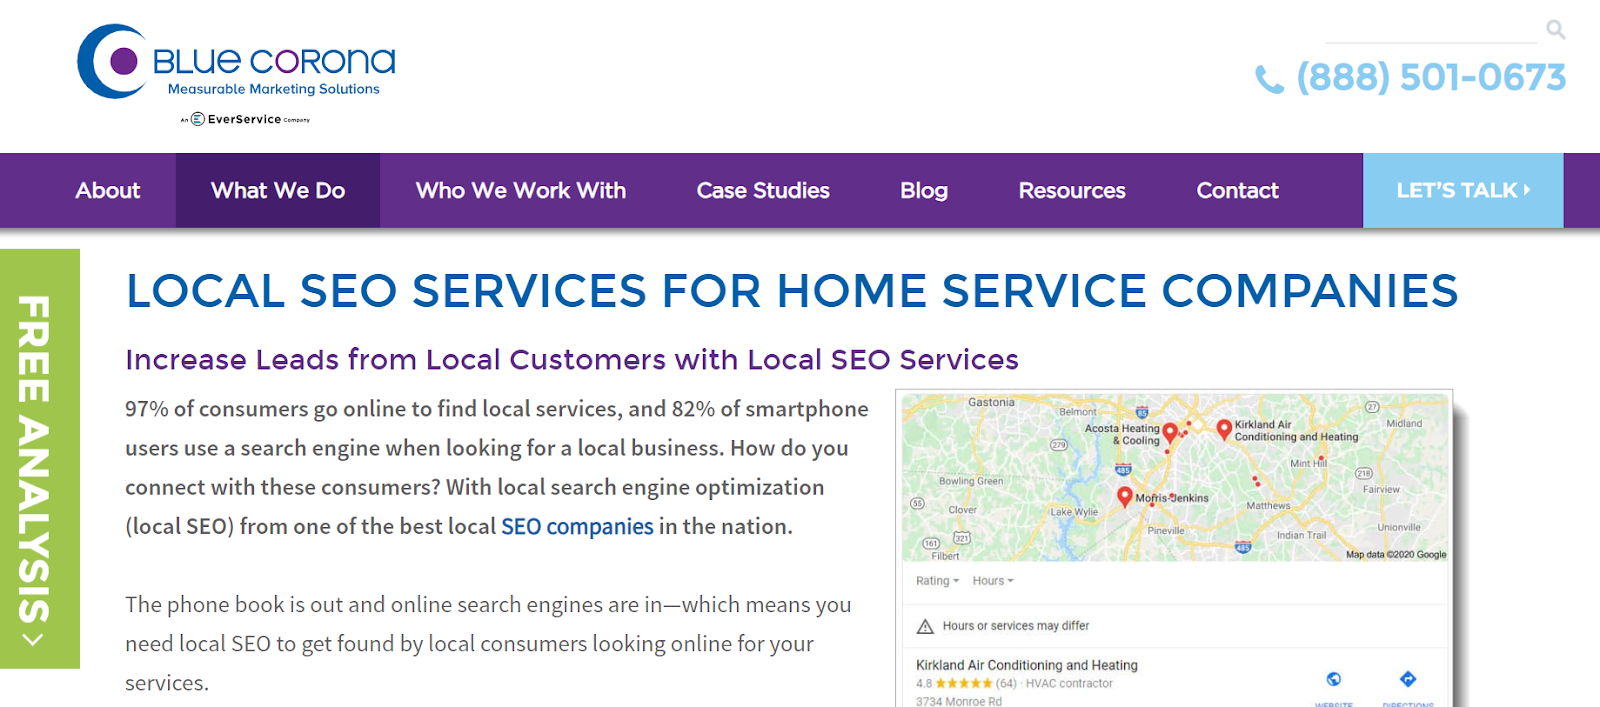 Blue Corona listed as one of the best SEO companies for Roofers